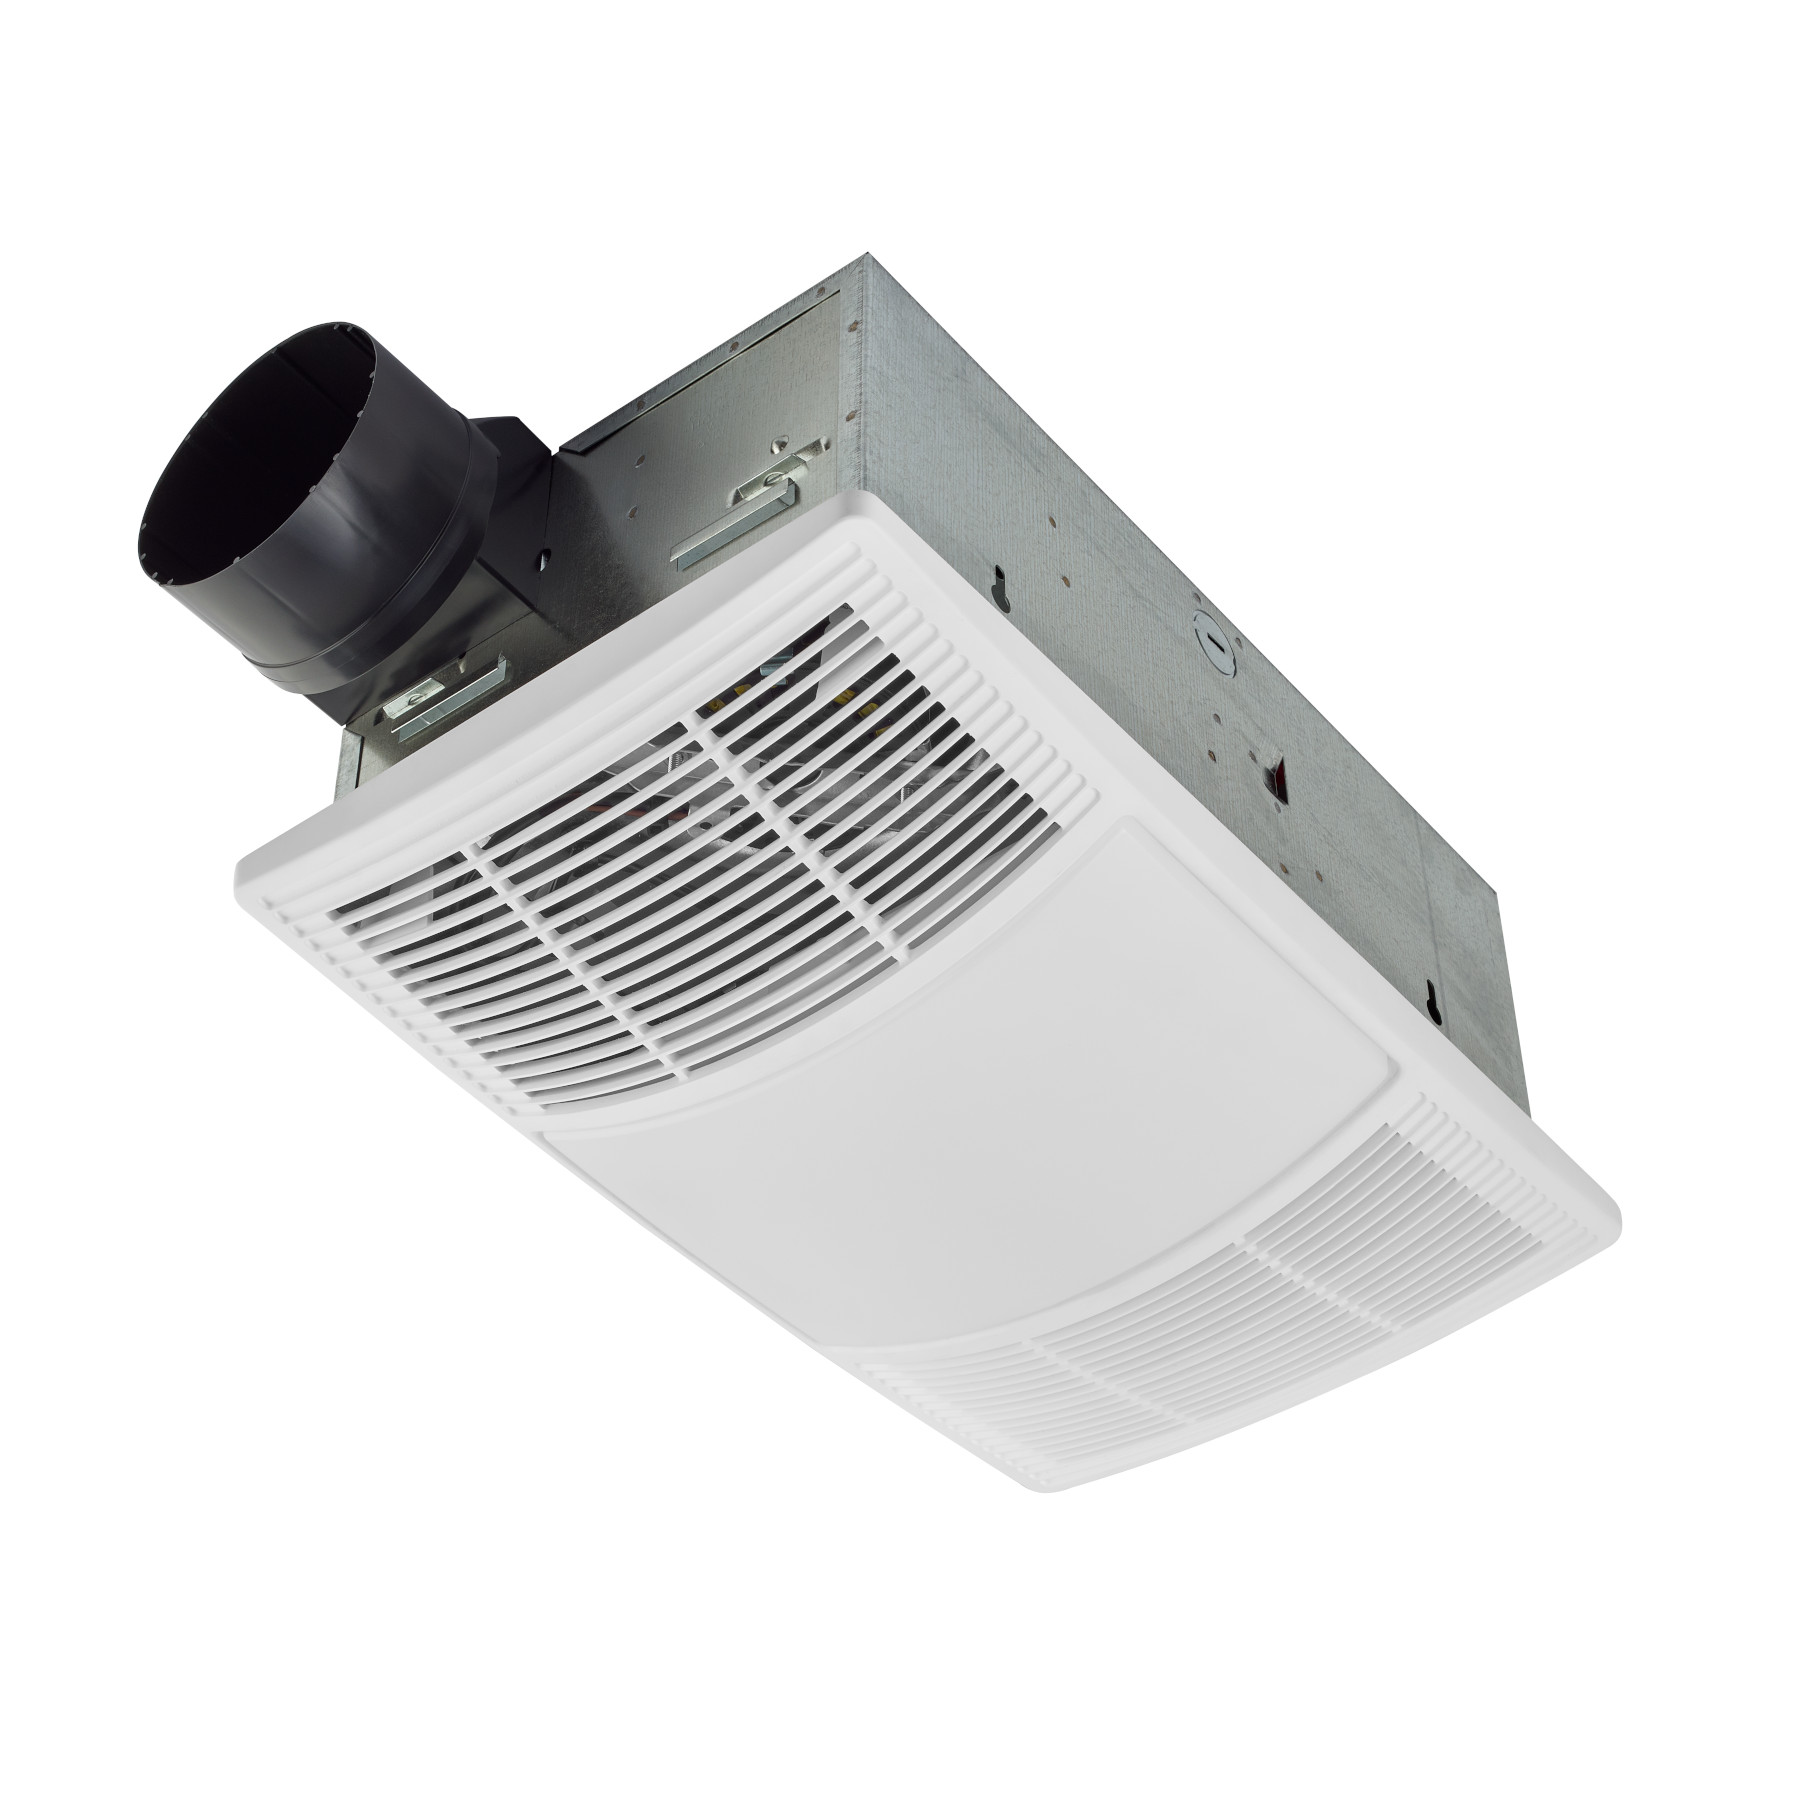 Bath And Exhaust Ventilation Fans With, Bathroom Ventilation Fan With Heat Lamp